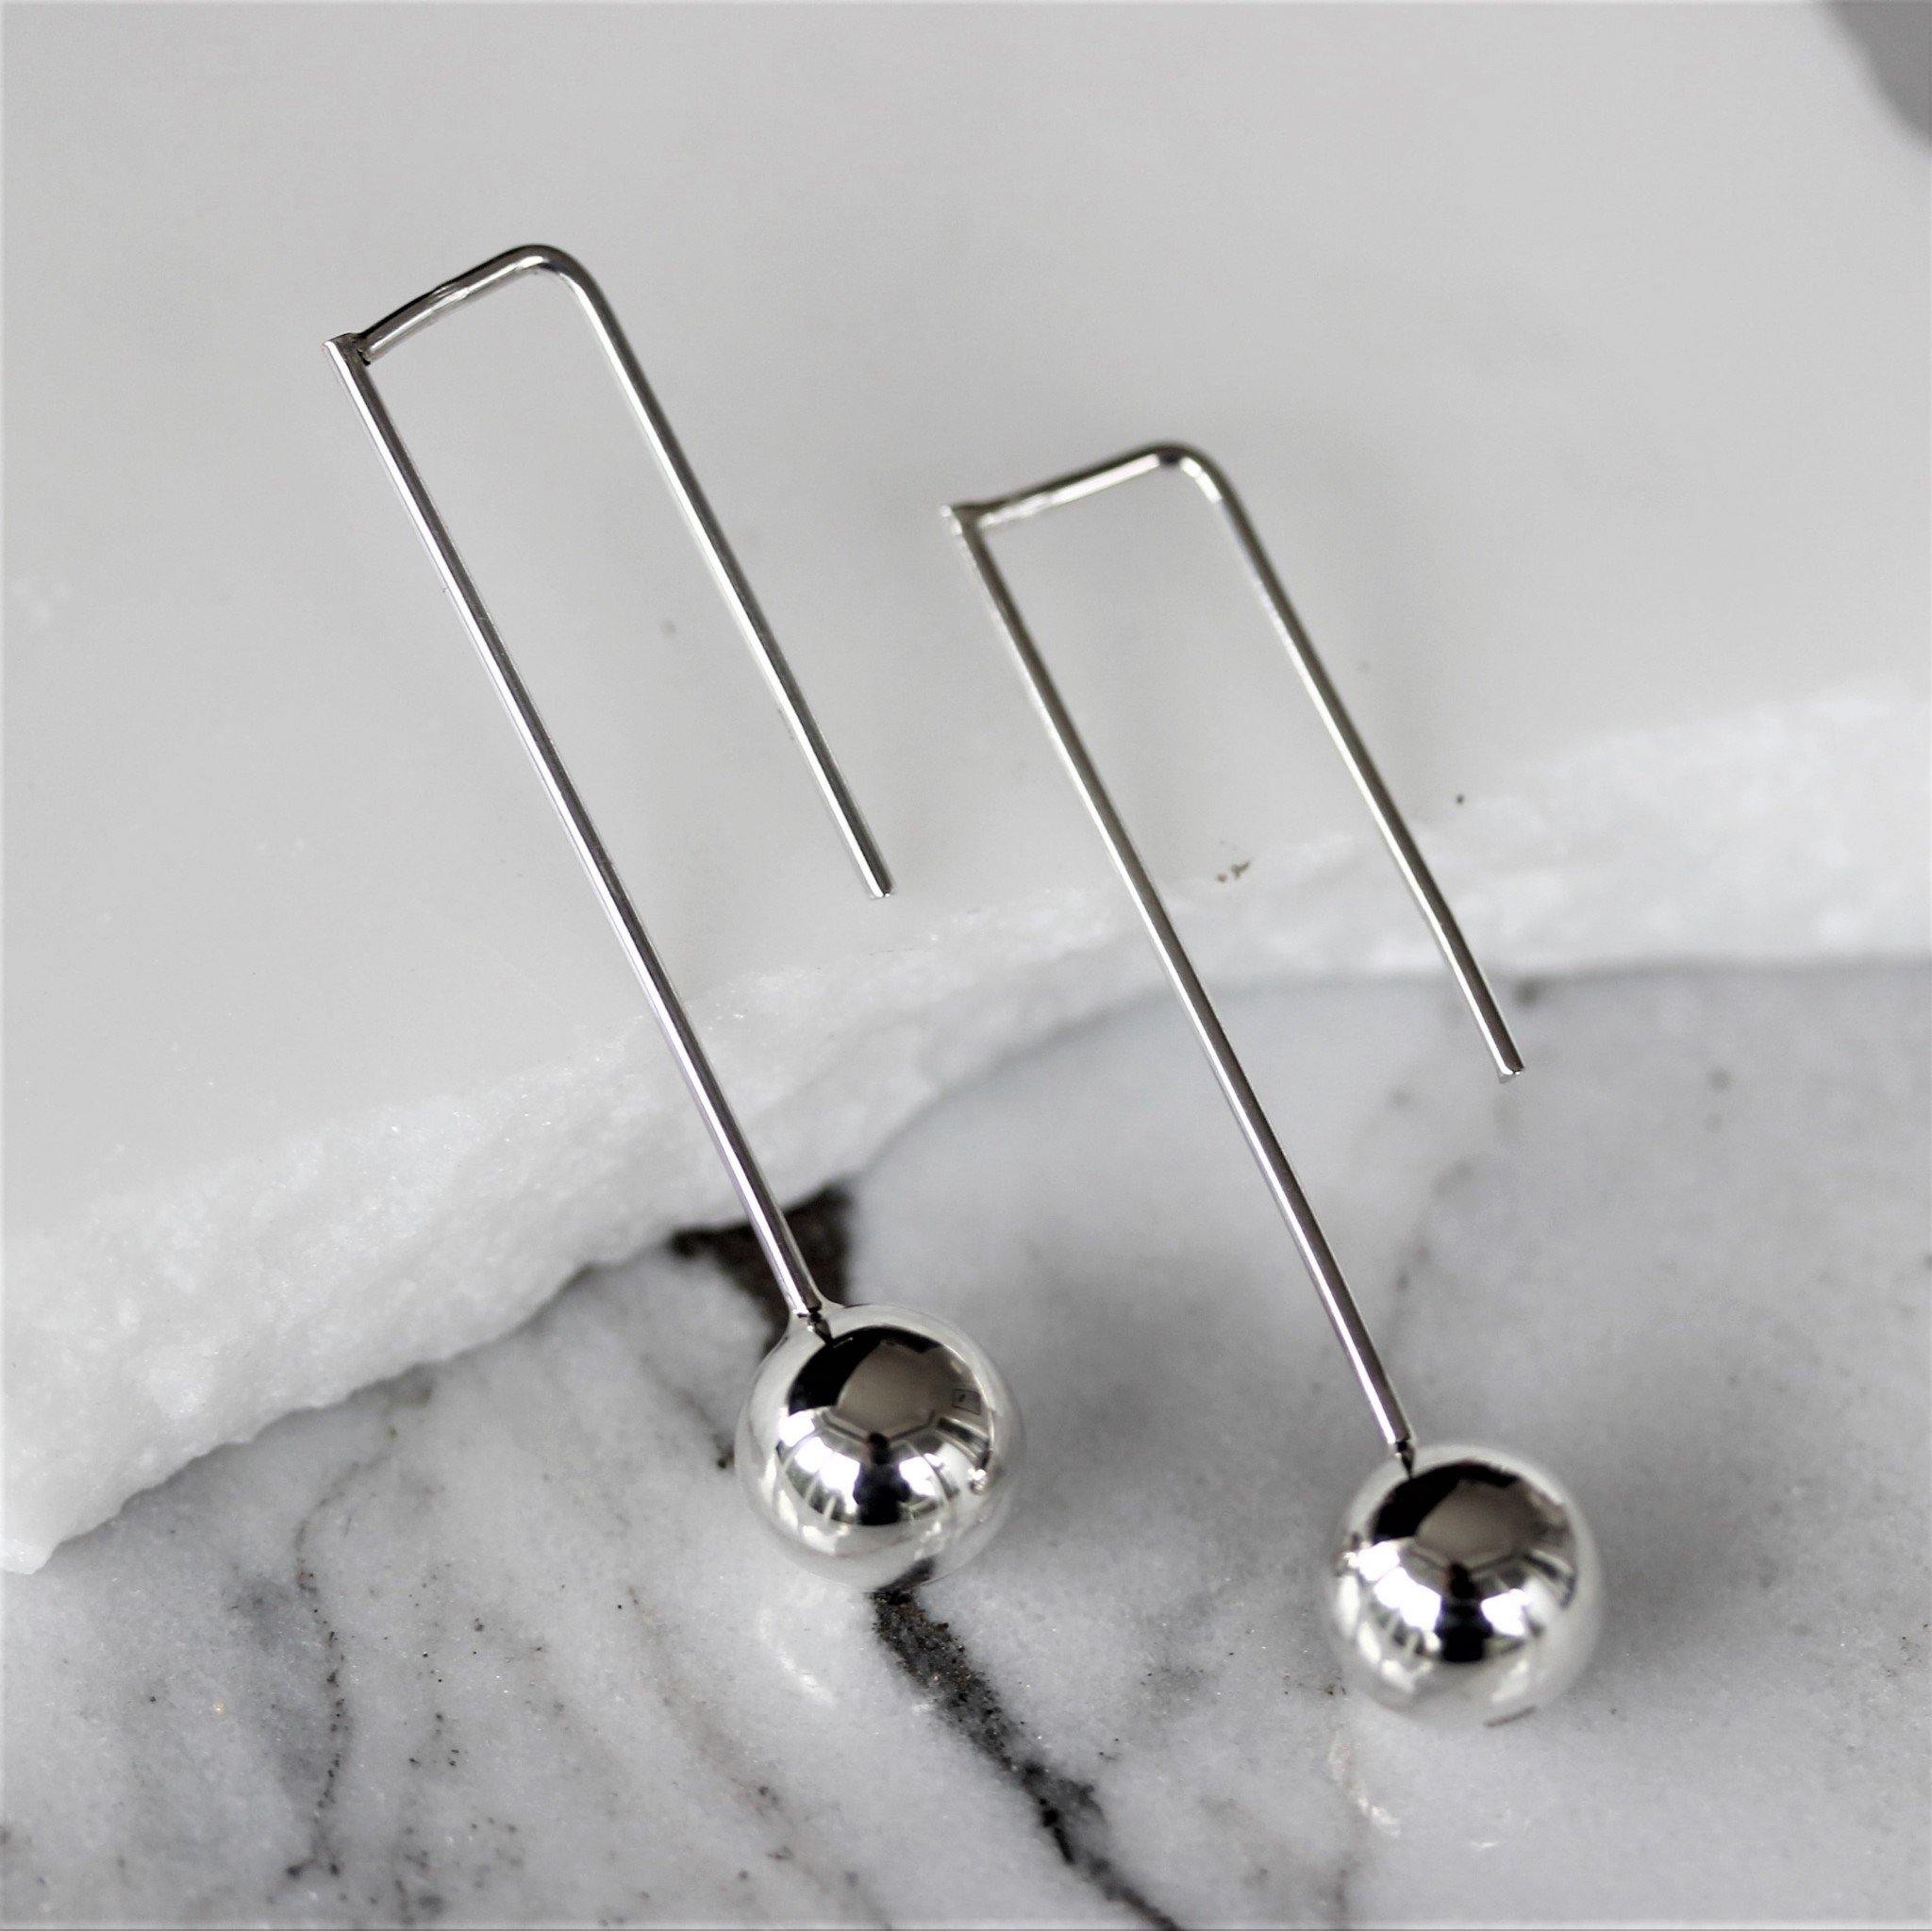 Sterling Silver Long Hook With 8mm Round Ball Drop Earrings - STERLING SILVER DESIGNS